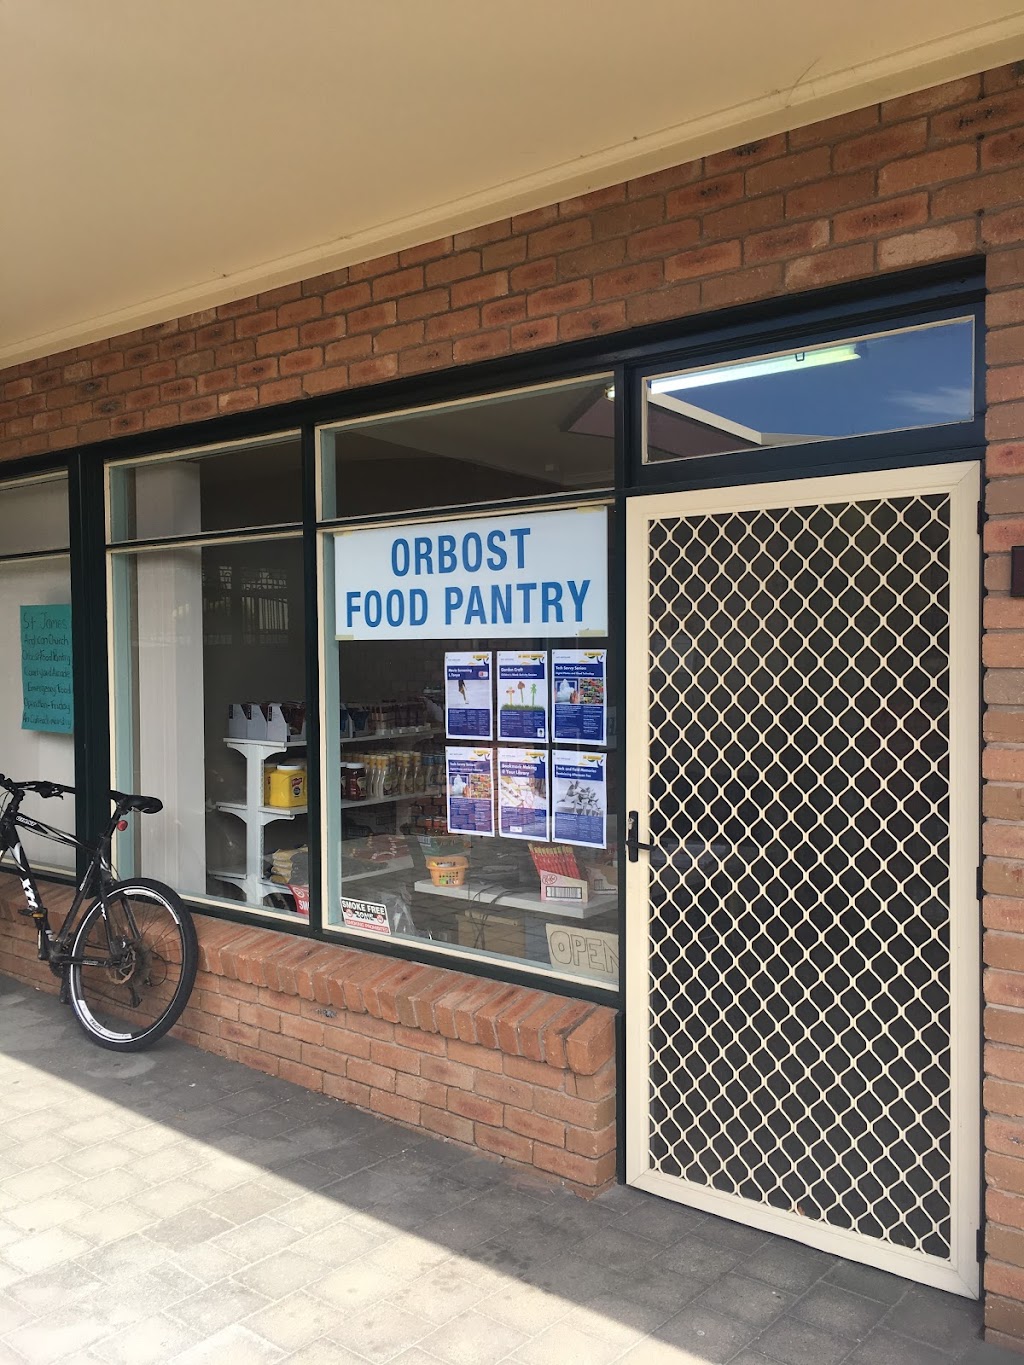 Orbost Food Pantry and Cafe |  | 144 Nicholson St, Orbost VIC 3888, Australia | 0417355930 OR +61 417 355 930